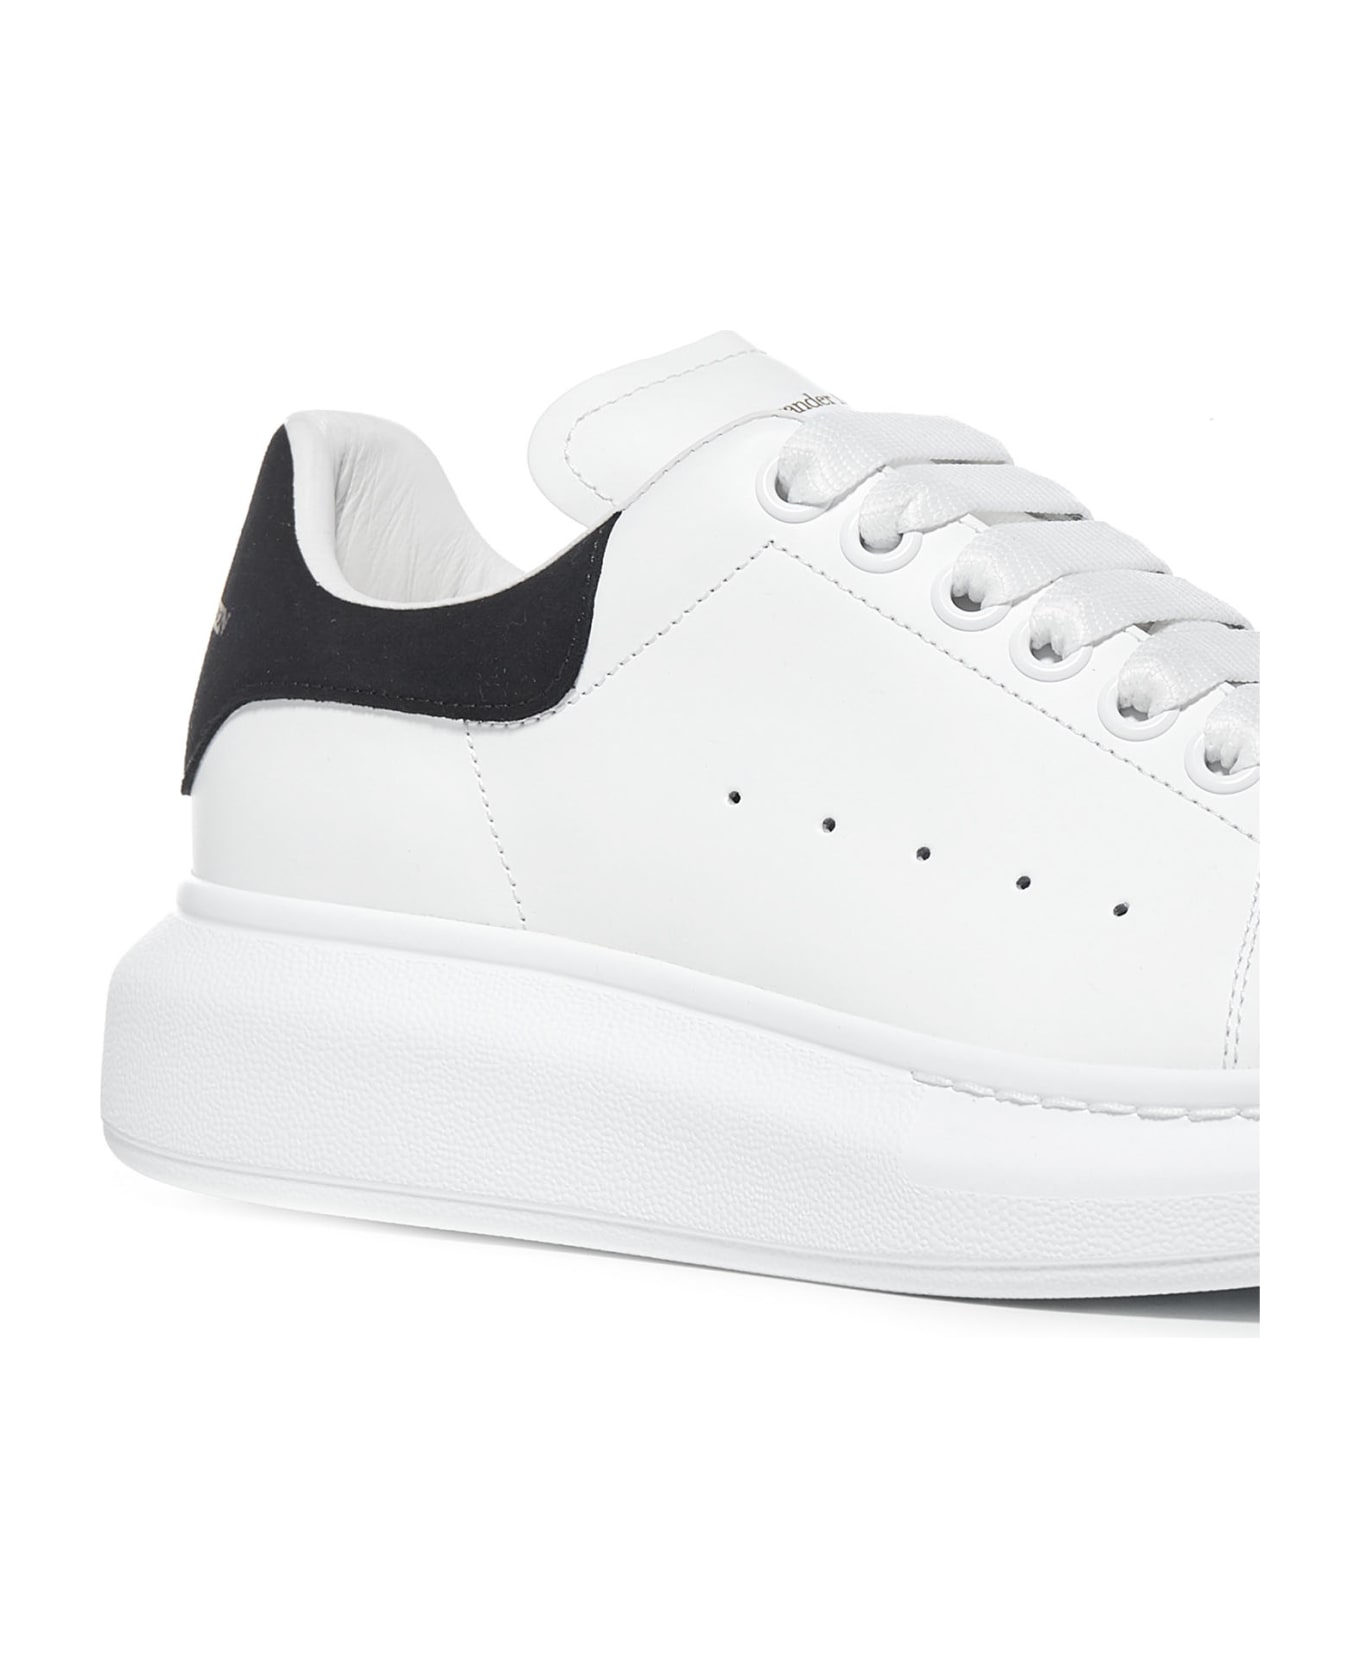 Alexander McQueen Oversized Sneakers In Leather With Contrasting Heel Tab - White Black